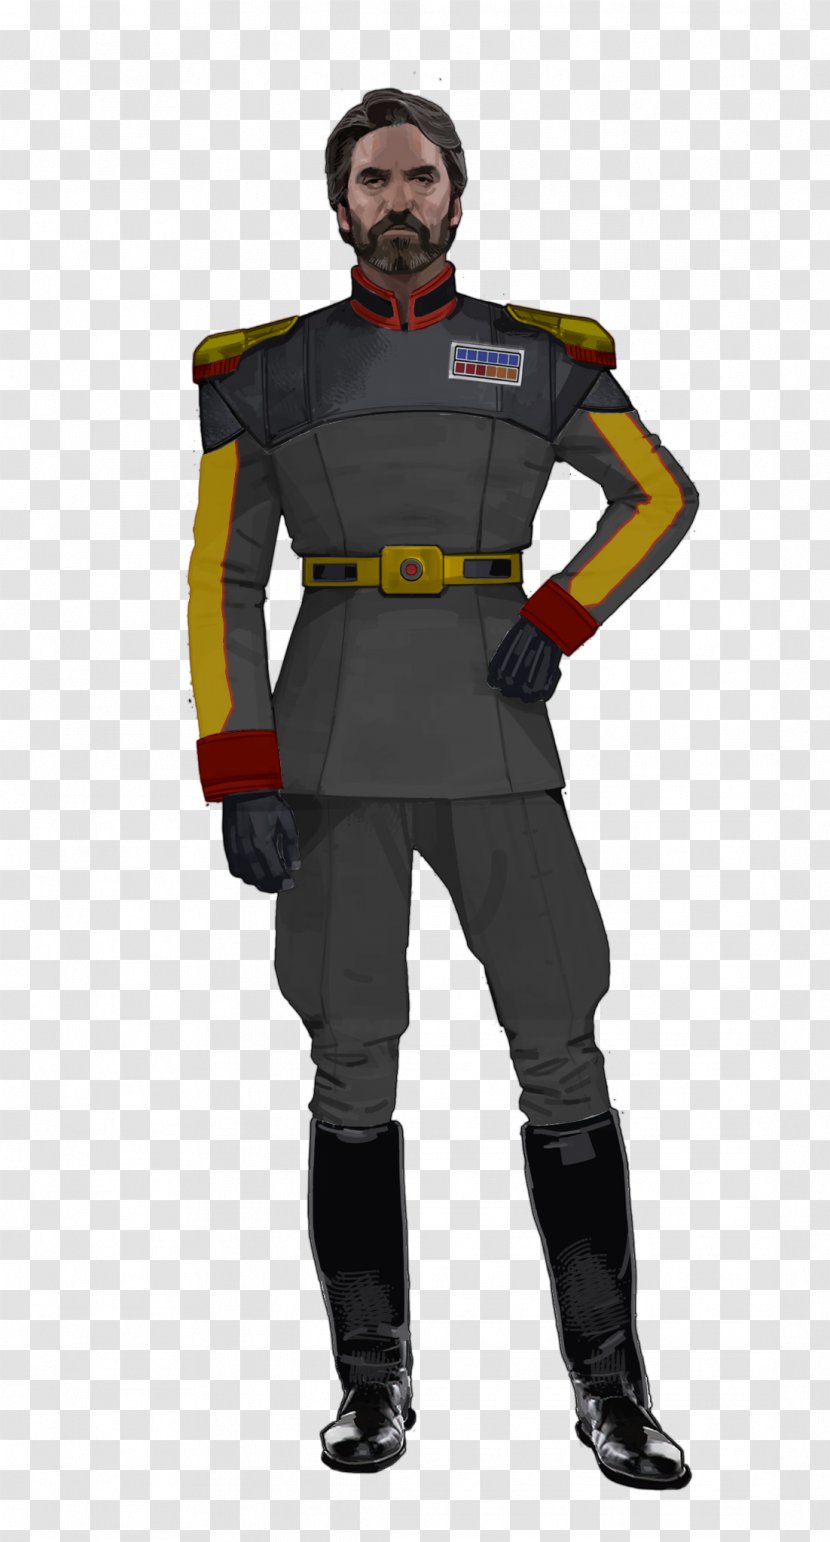 Star Wars Roleplaying Game Stormtrooper Wookieepedia Costume - Idea - Navy Uniform Transparent PNG